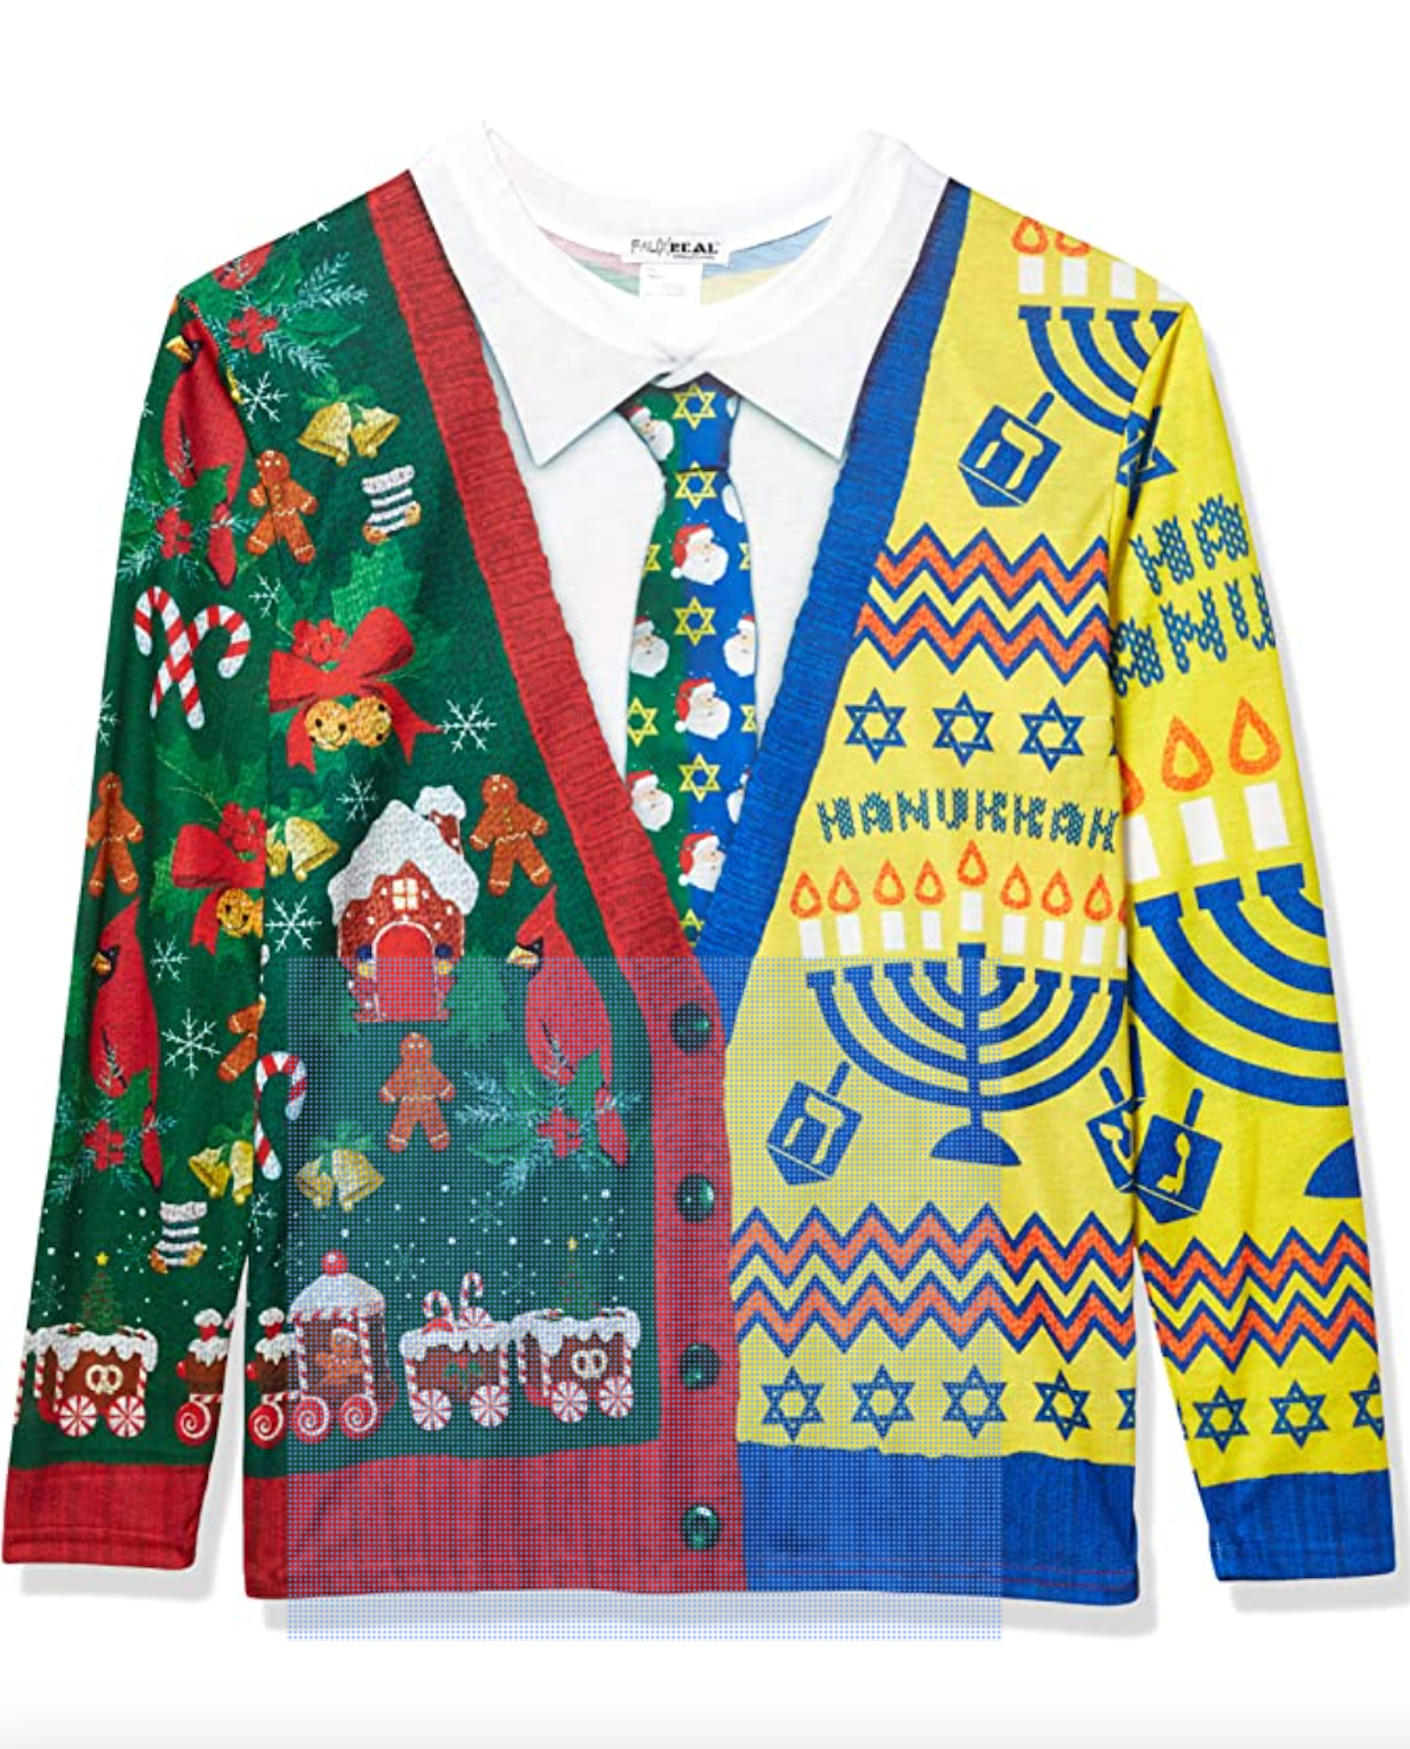 Funny holiday sweater with a Jewish touch